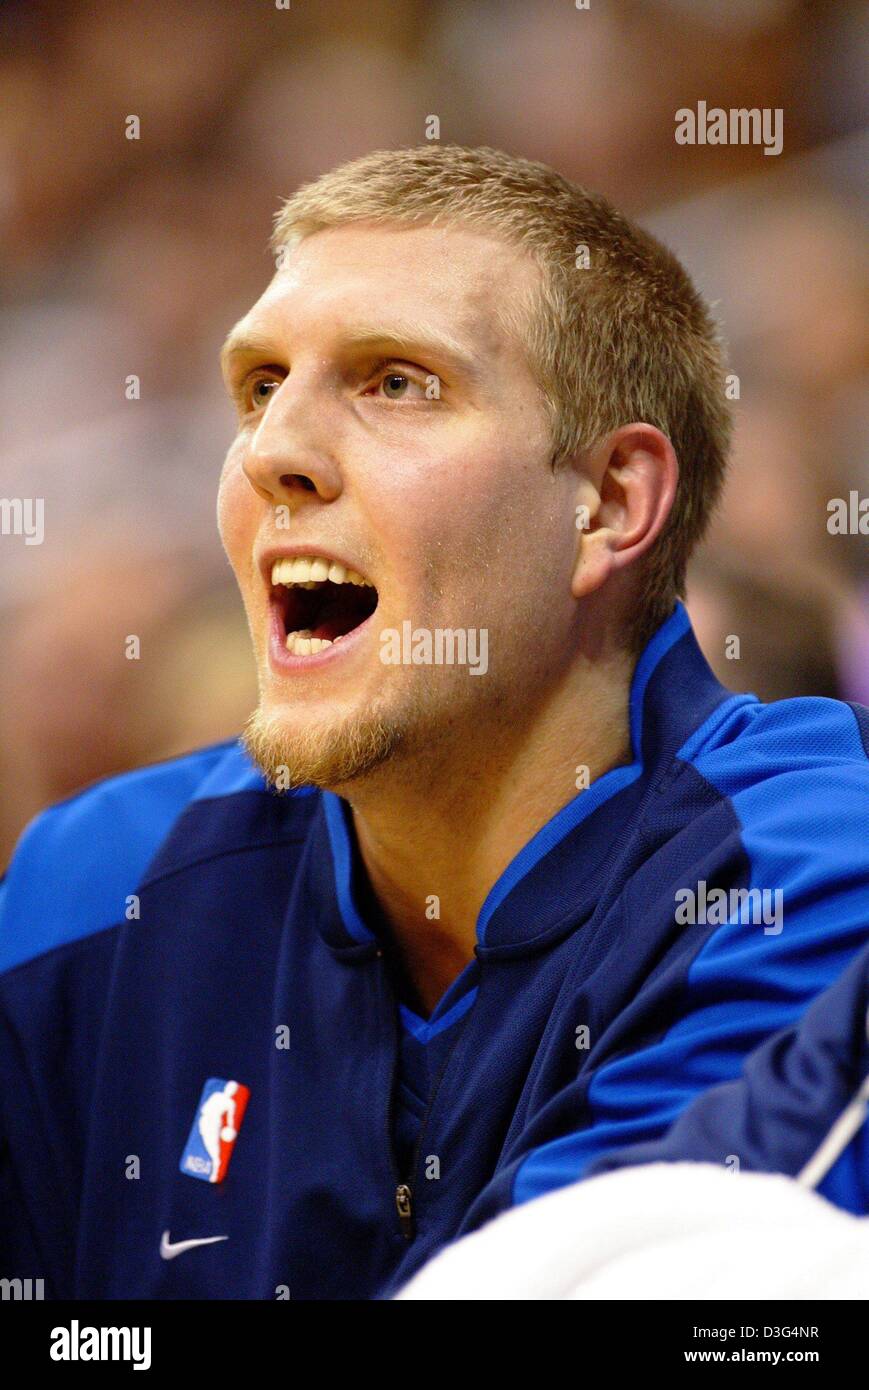 (dpa) - German basketball pro Dirk Nowitzki, who plays for the Dallas Mavericks,  shouts encouragement to his fellow players on the floor during the NBA championship match between Dallas Mavericks and Los Angeles Lakers in Los Angeles, California, USA, 13 December 2003. Dallas won the game by a score of 110-93. It was the first victory in 13 years against the Lakers who had previou Stock Photo